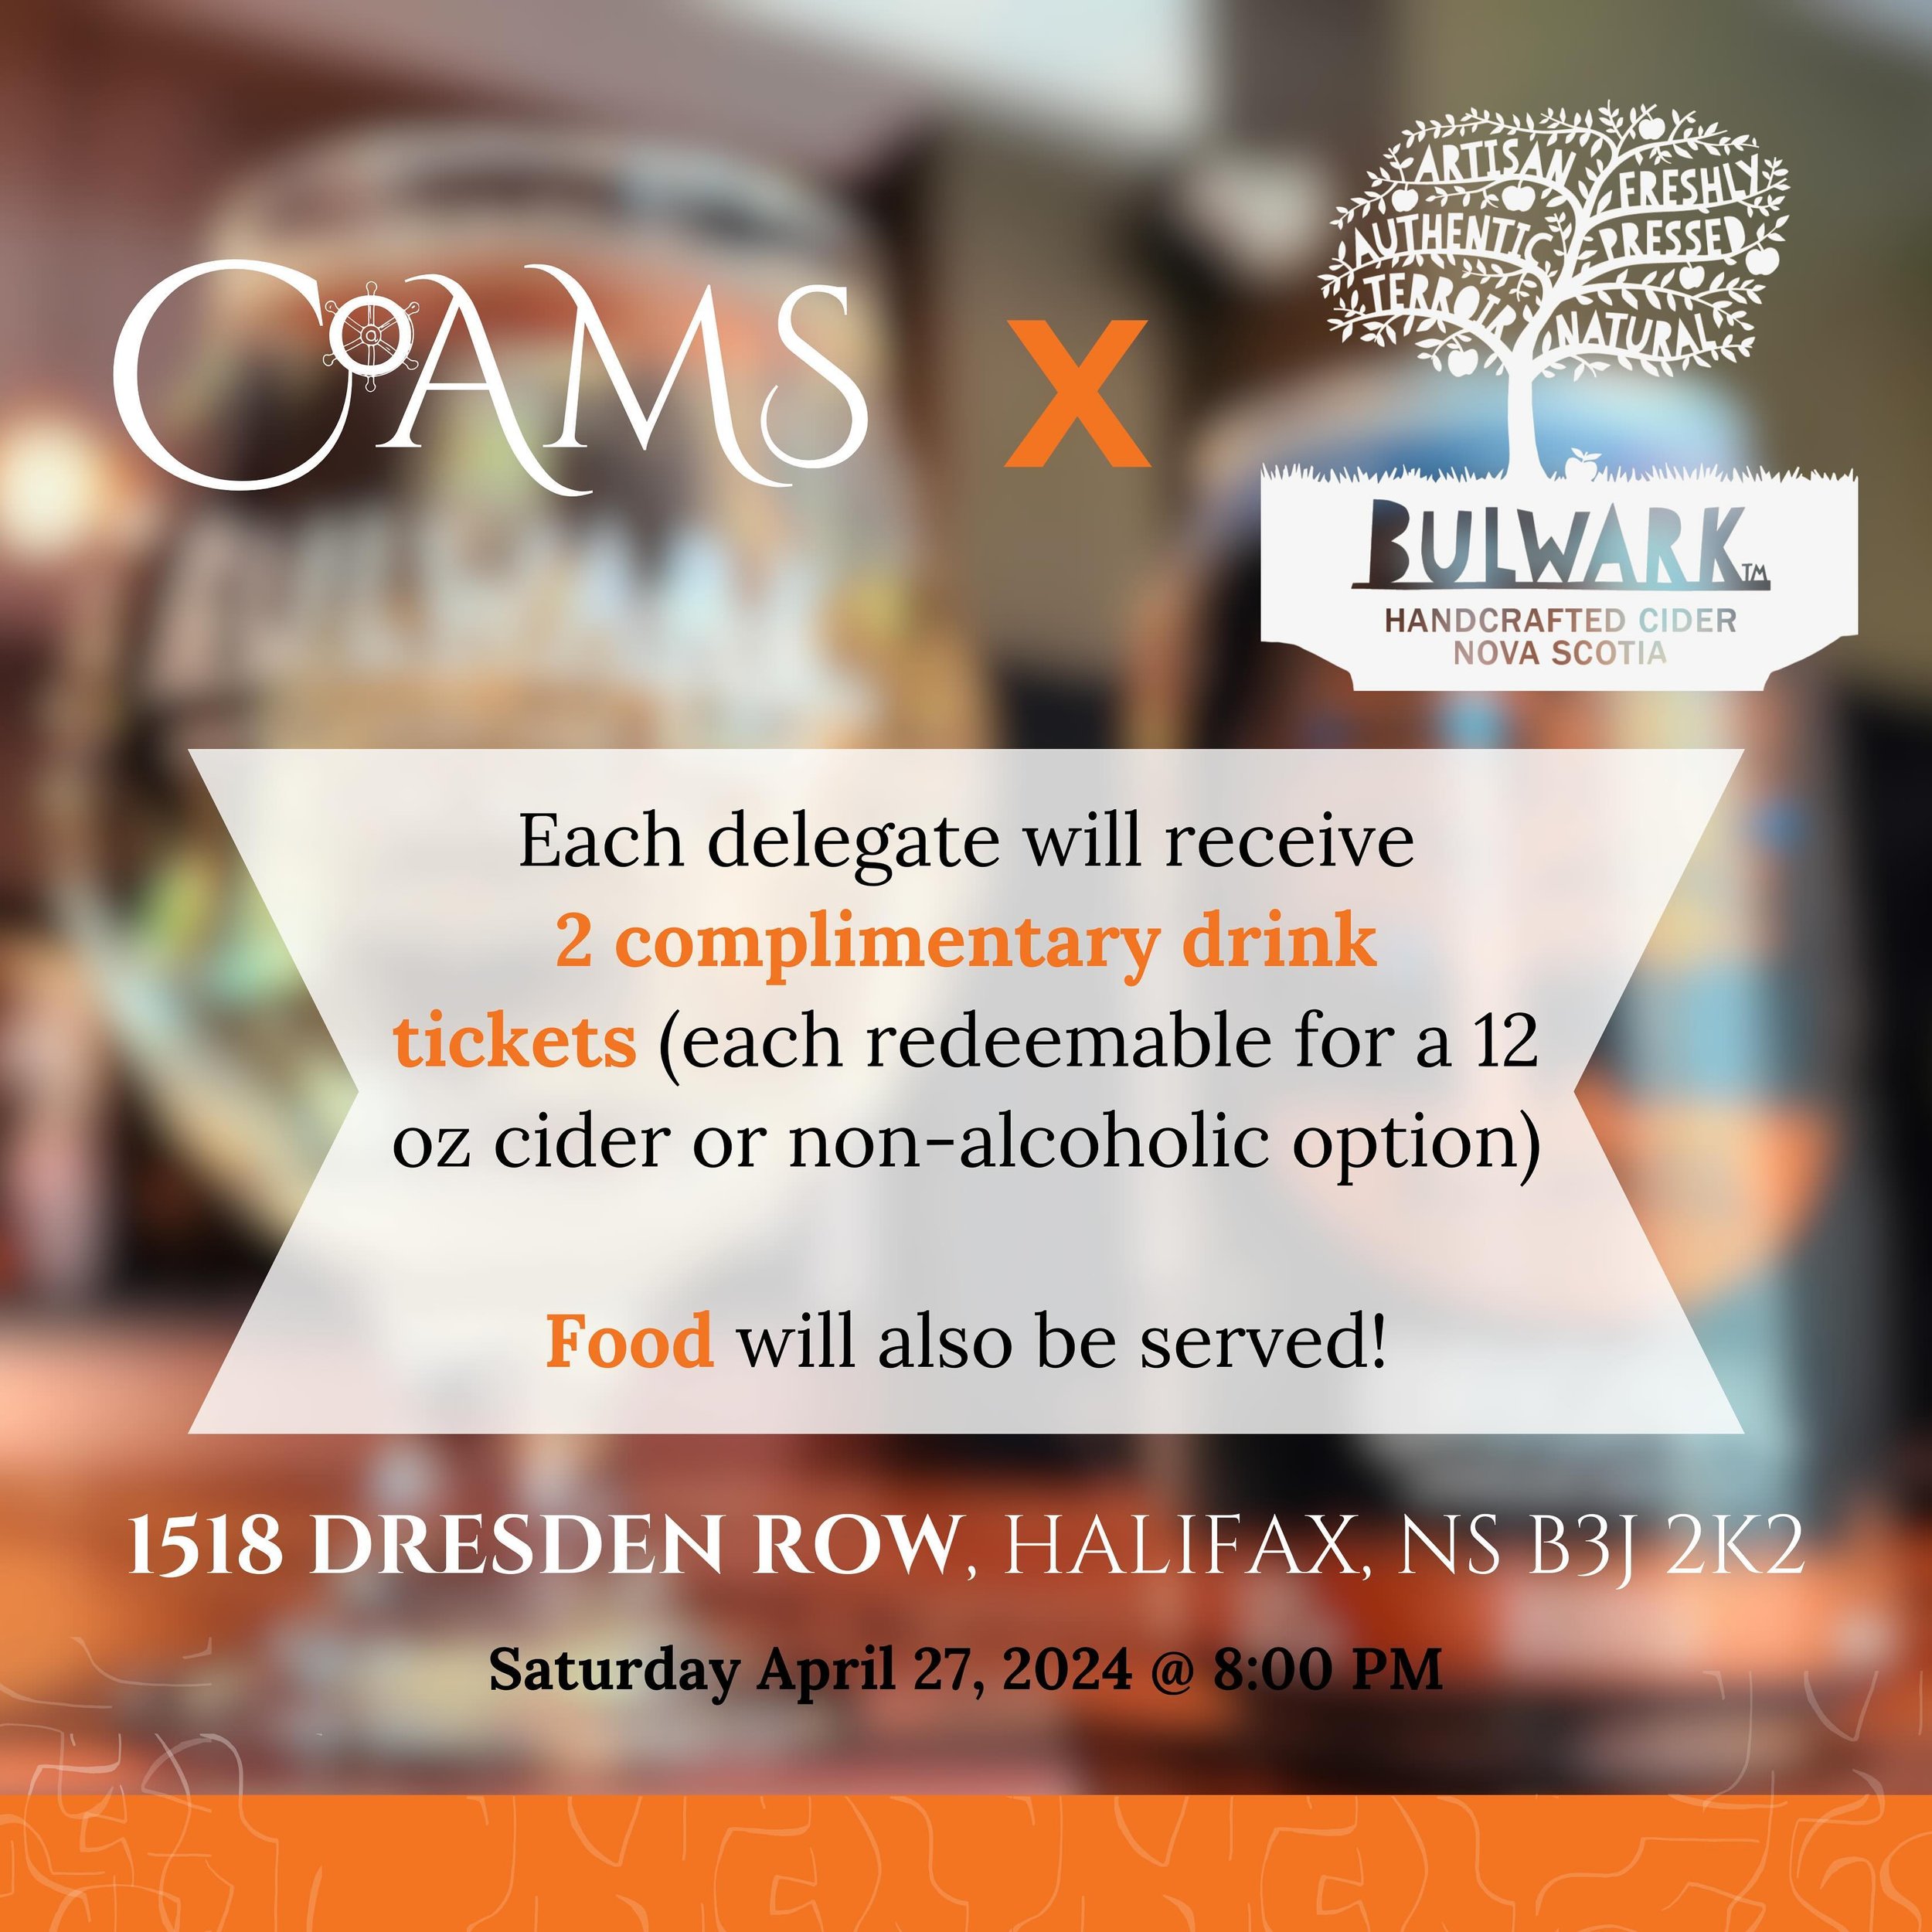 CoAMS x Bulwark

Each delegate will receive 2 complimentary drink tickets (each redeemable for a 12 oz cider or non-alcoholic option) 

Food will also be served!